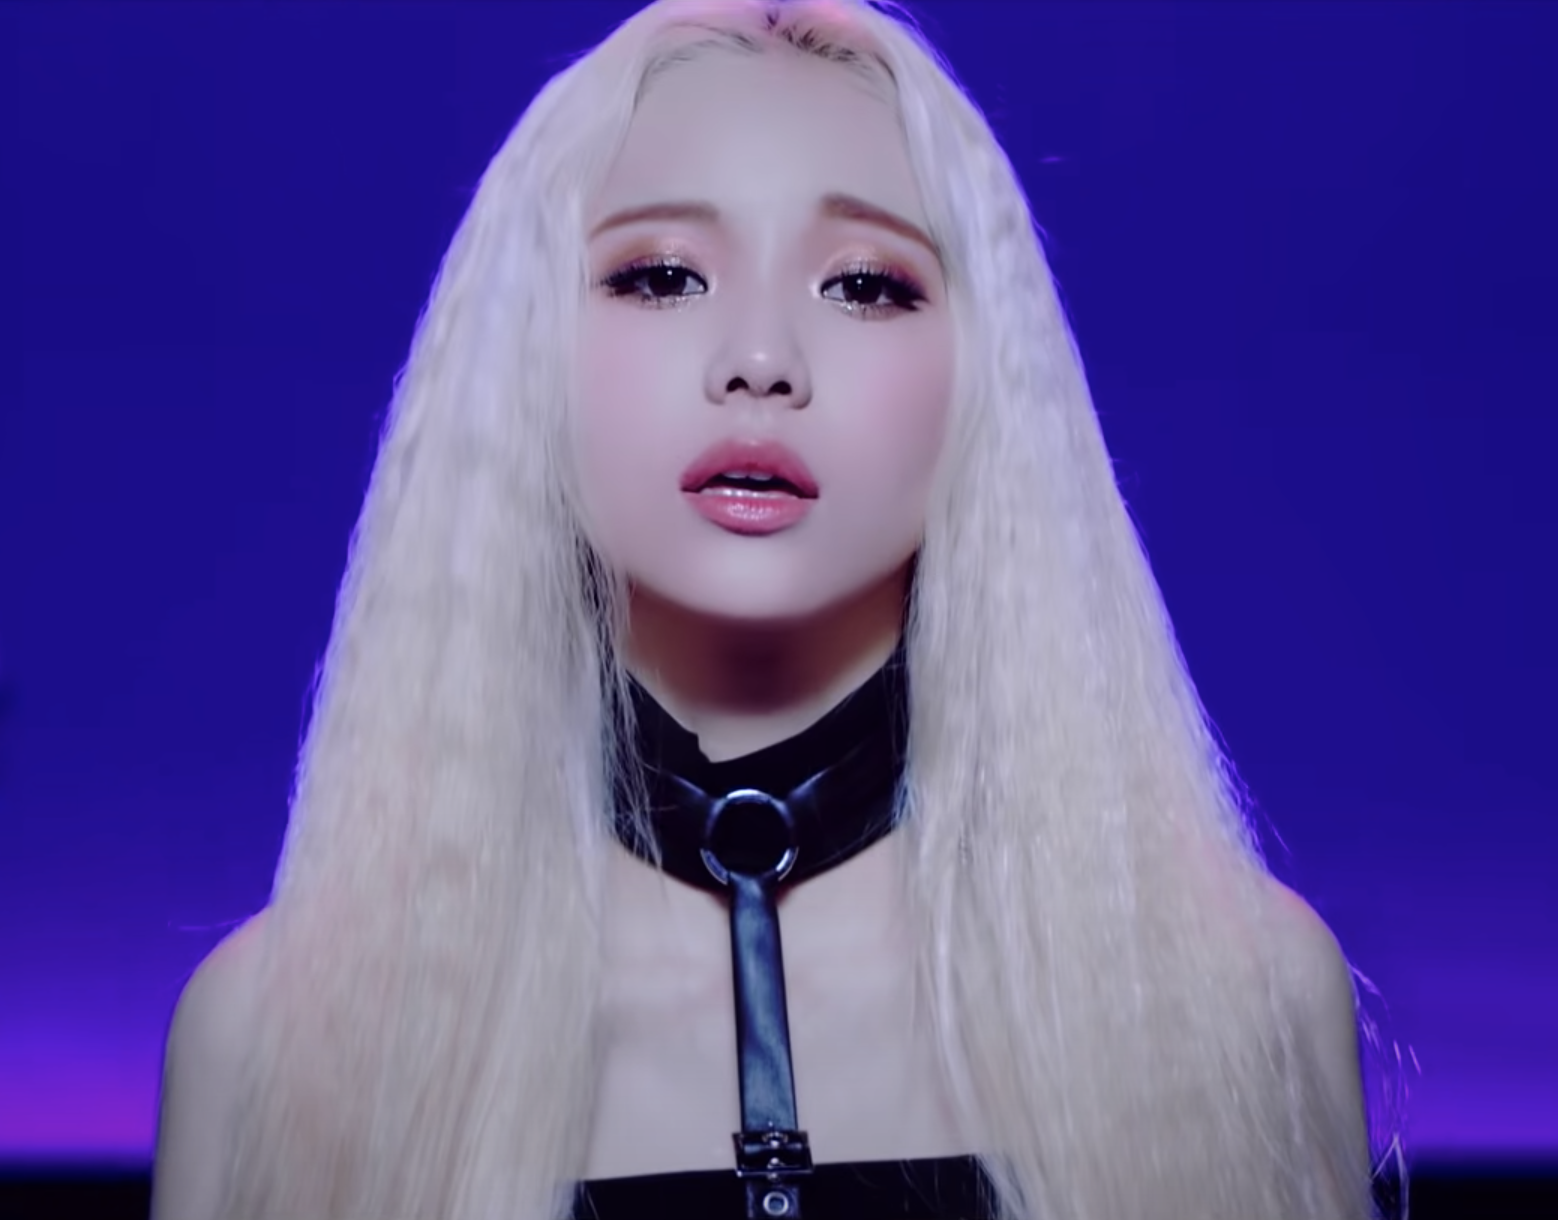 JinSoul sings to the camera, a pleading expression in her eyes